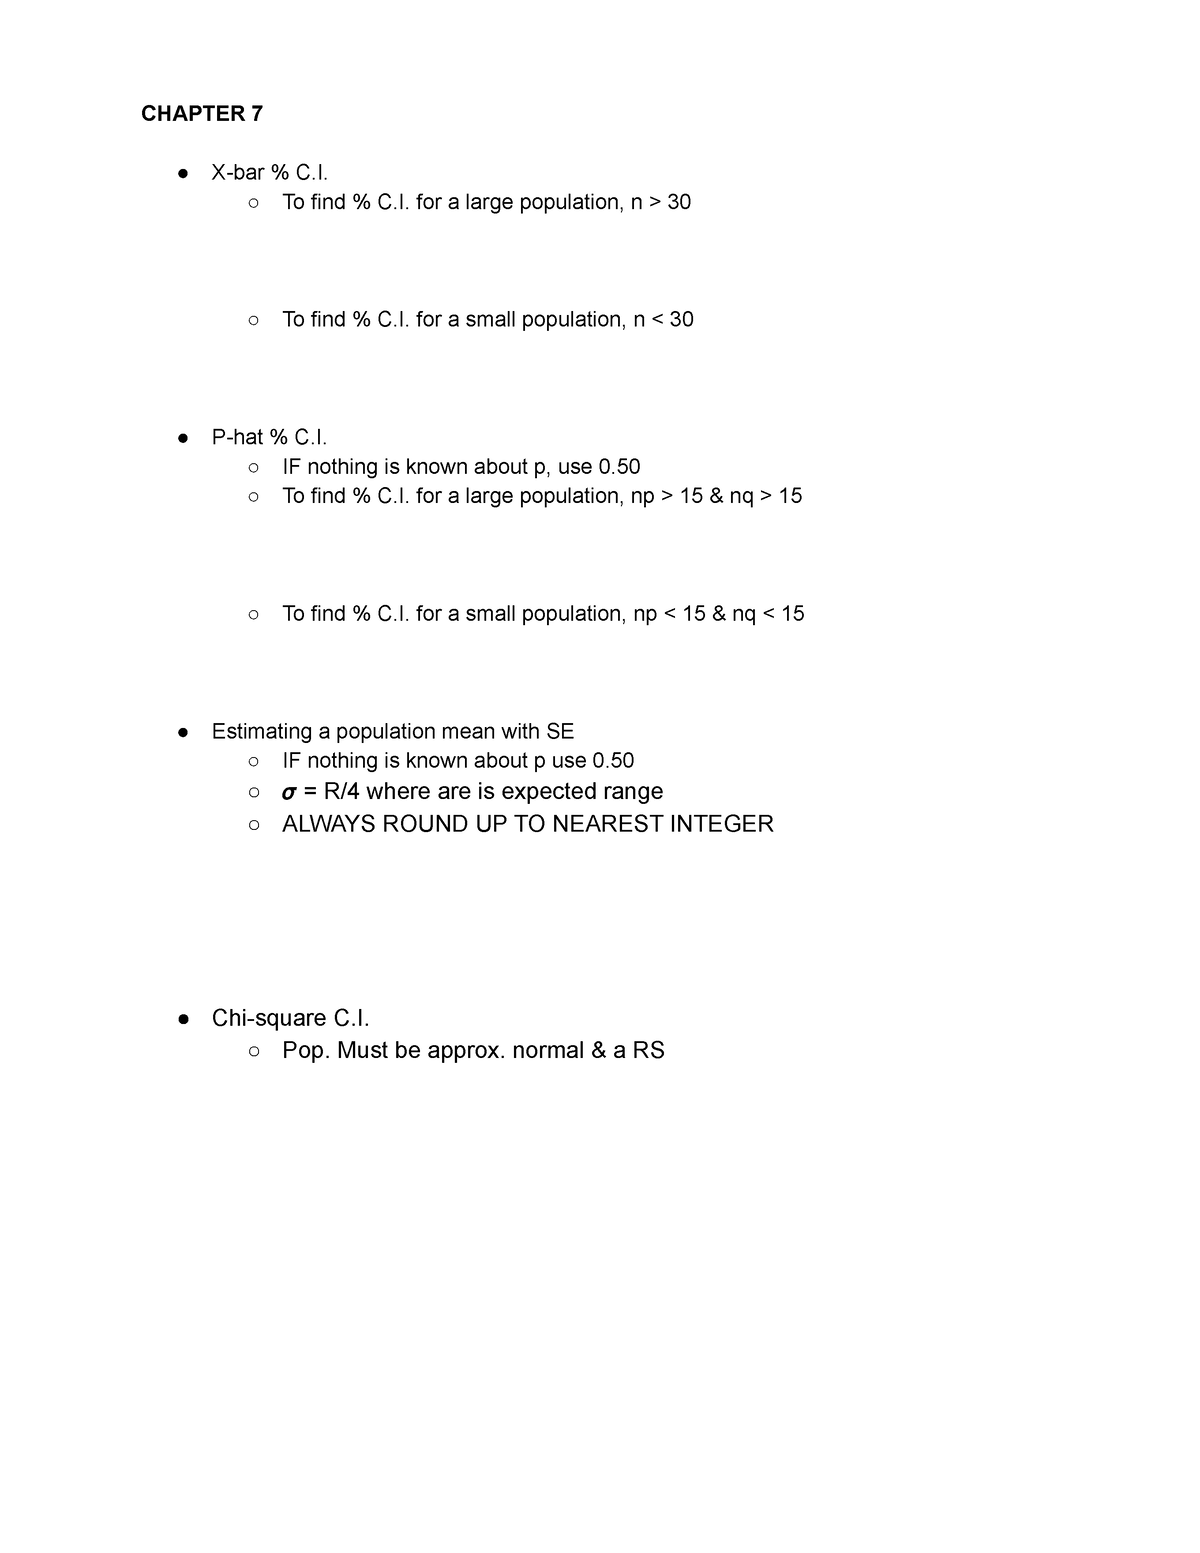 STA 3312 Formula Sheet CHAPTER 7 Xbar C. To find C. for a large